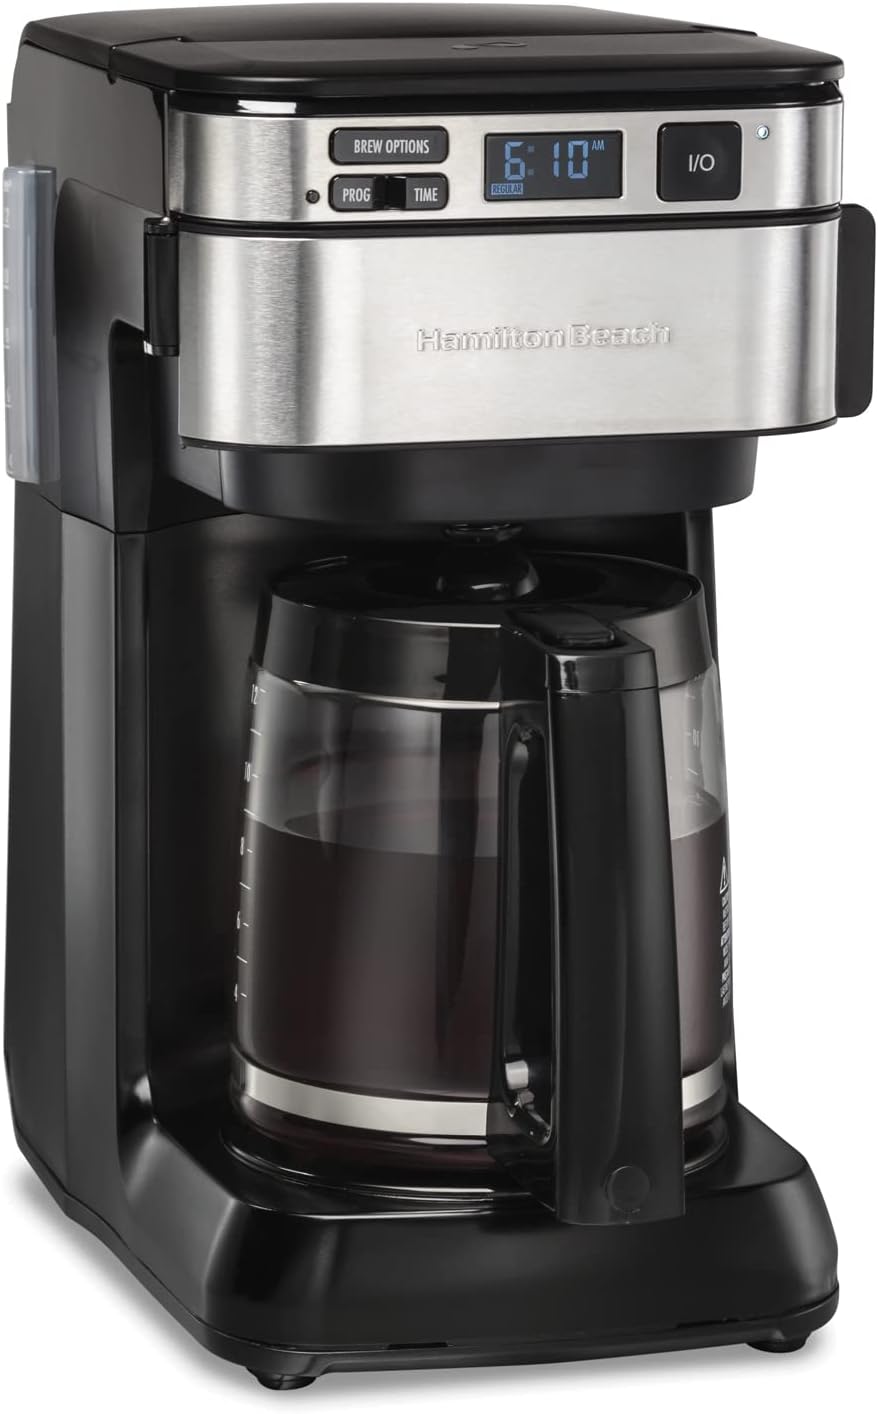 Ends Tonight! Hamilton Beach Programmable Coffee Maker, 12 Cups, Front Access Easy Fill, Pause - Save Big on Your Purchase!